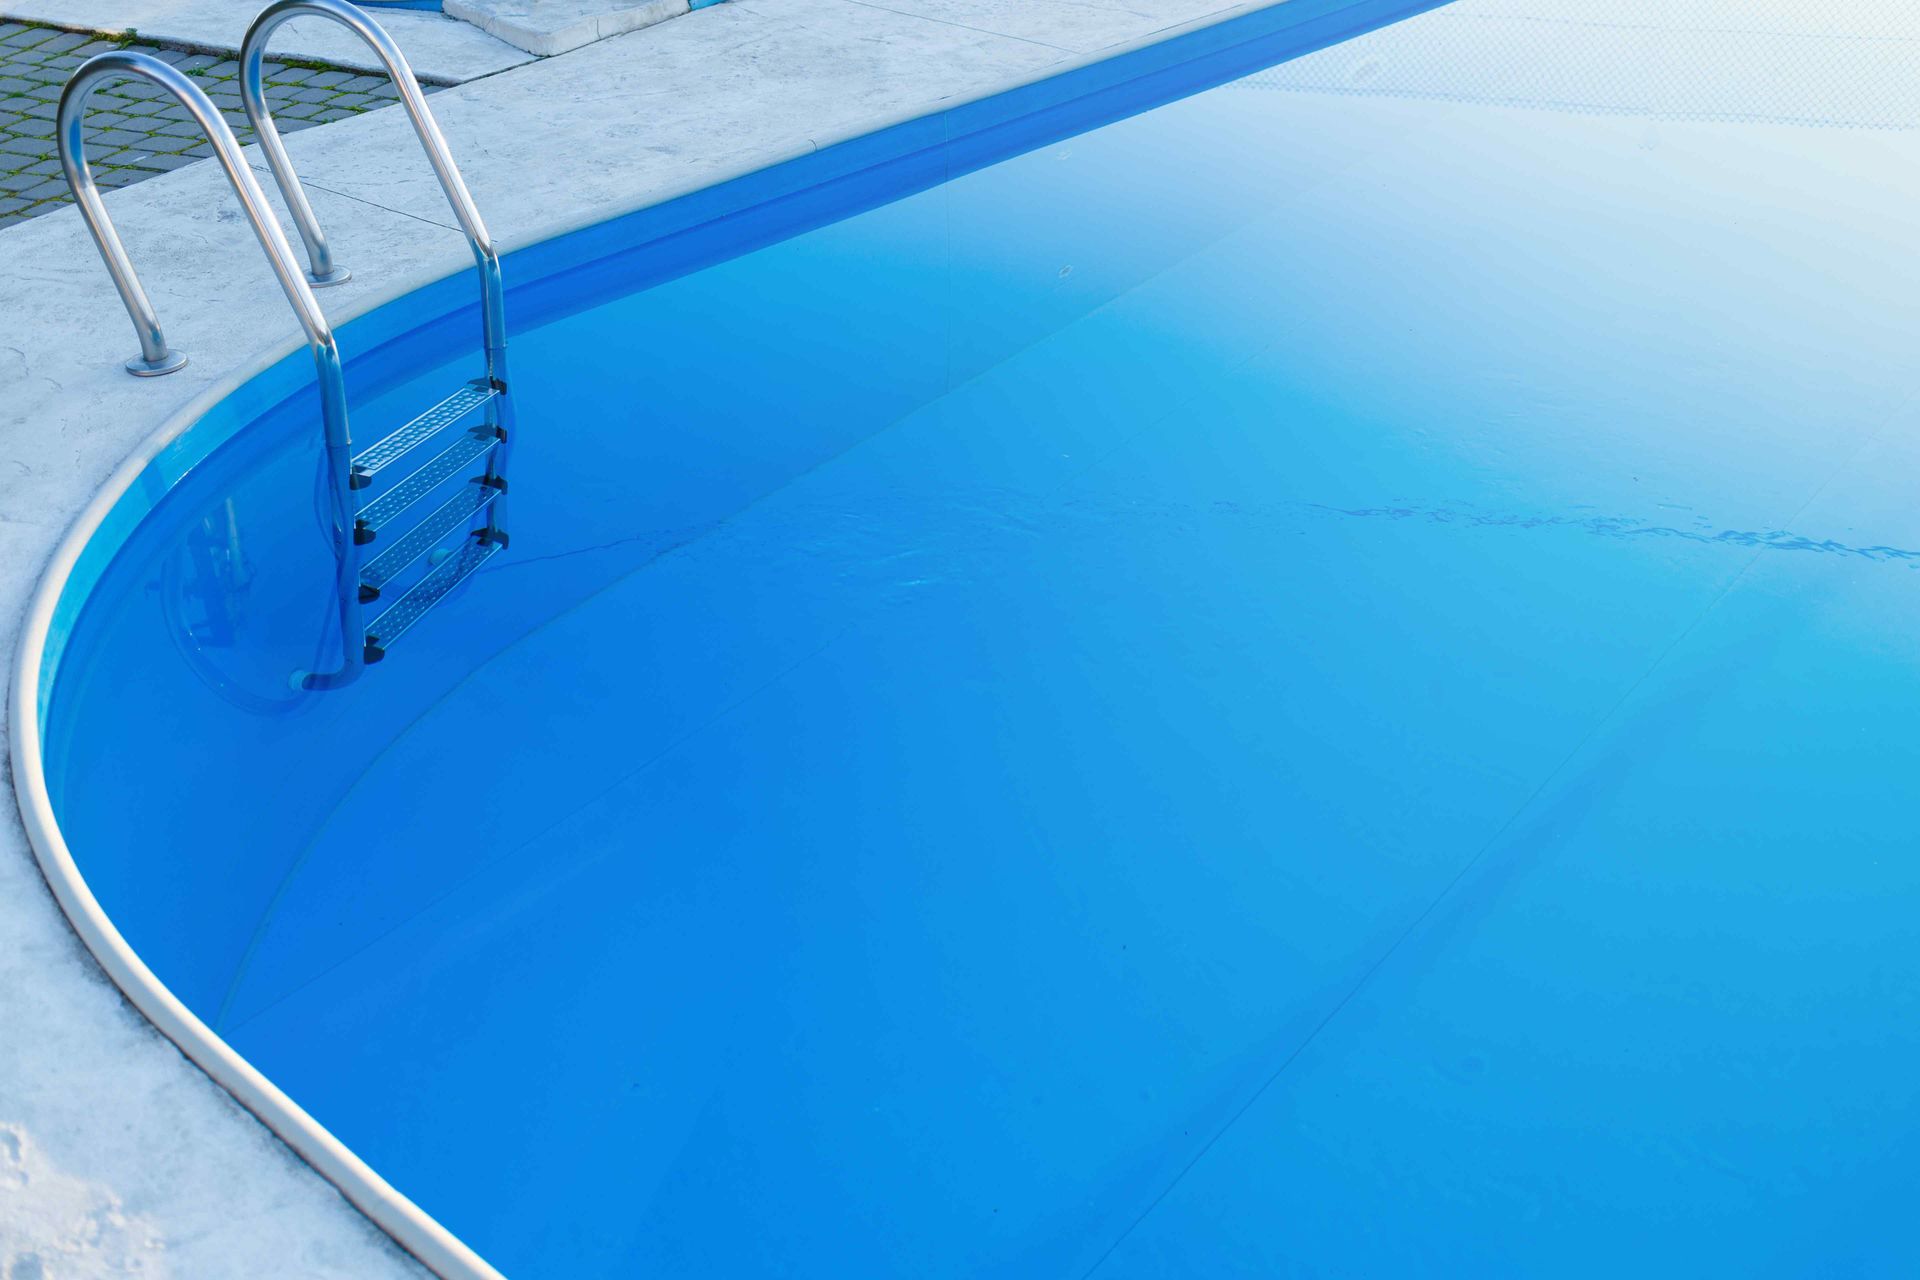 Pristine view of a pool